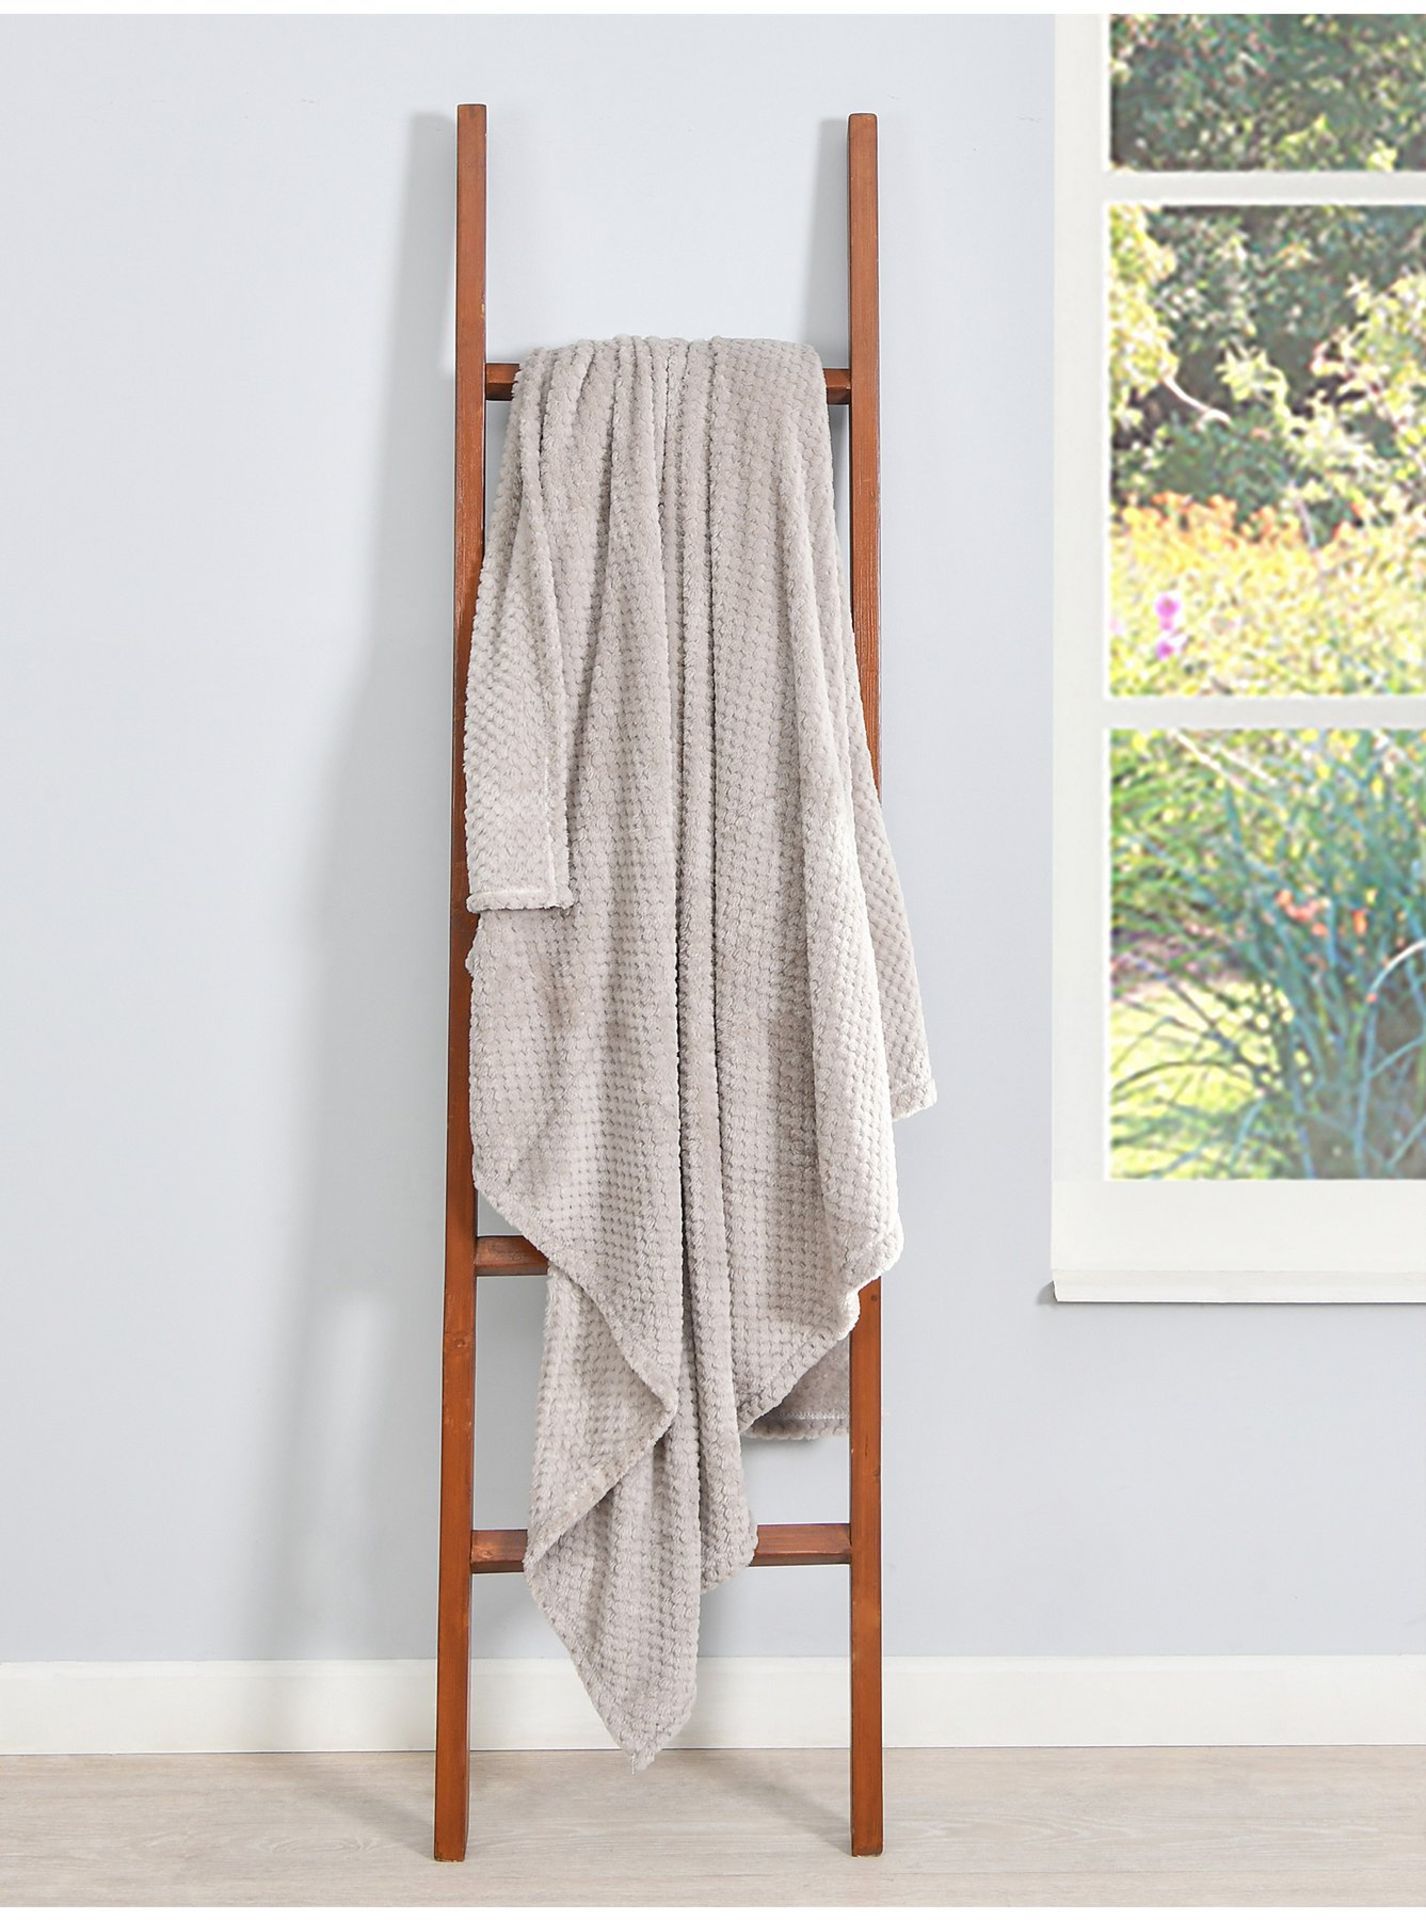 16x NEW & PACKAGED SLEEPDOWN Cosy Collection Soft Touch Waffle Fleece Throw 130 x 160cm - NATURAL. - Image 2 of 6